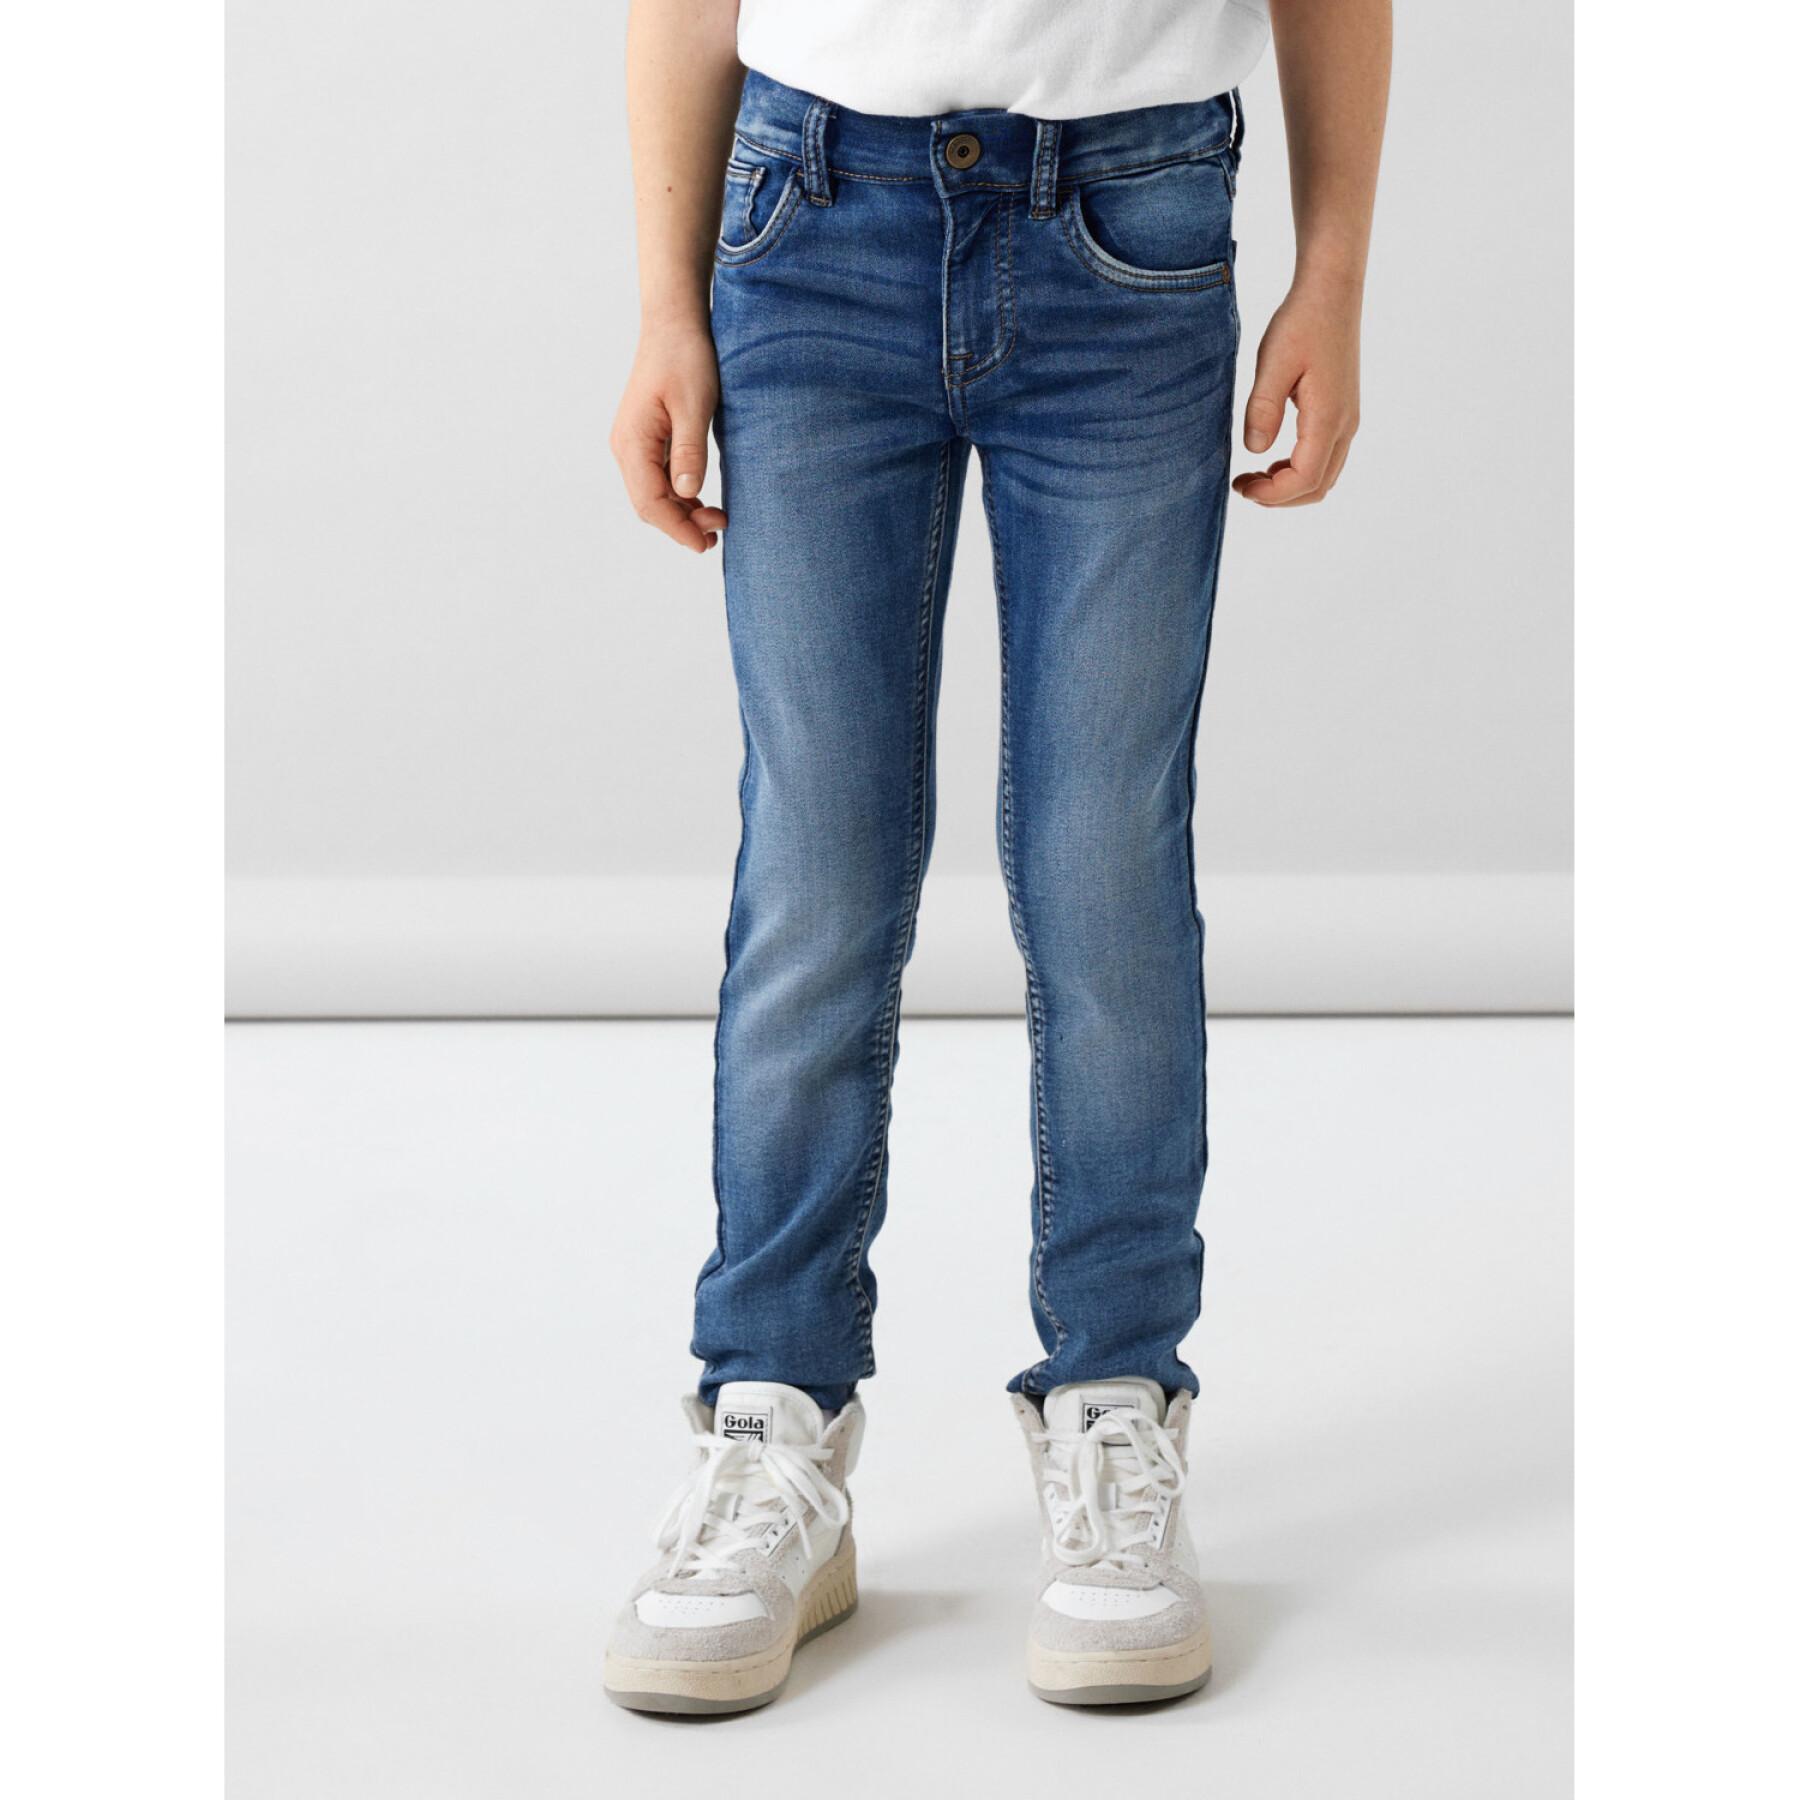 Jungen-Jeans Name it Theo 3113-TH